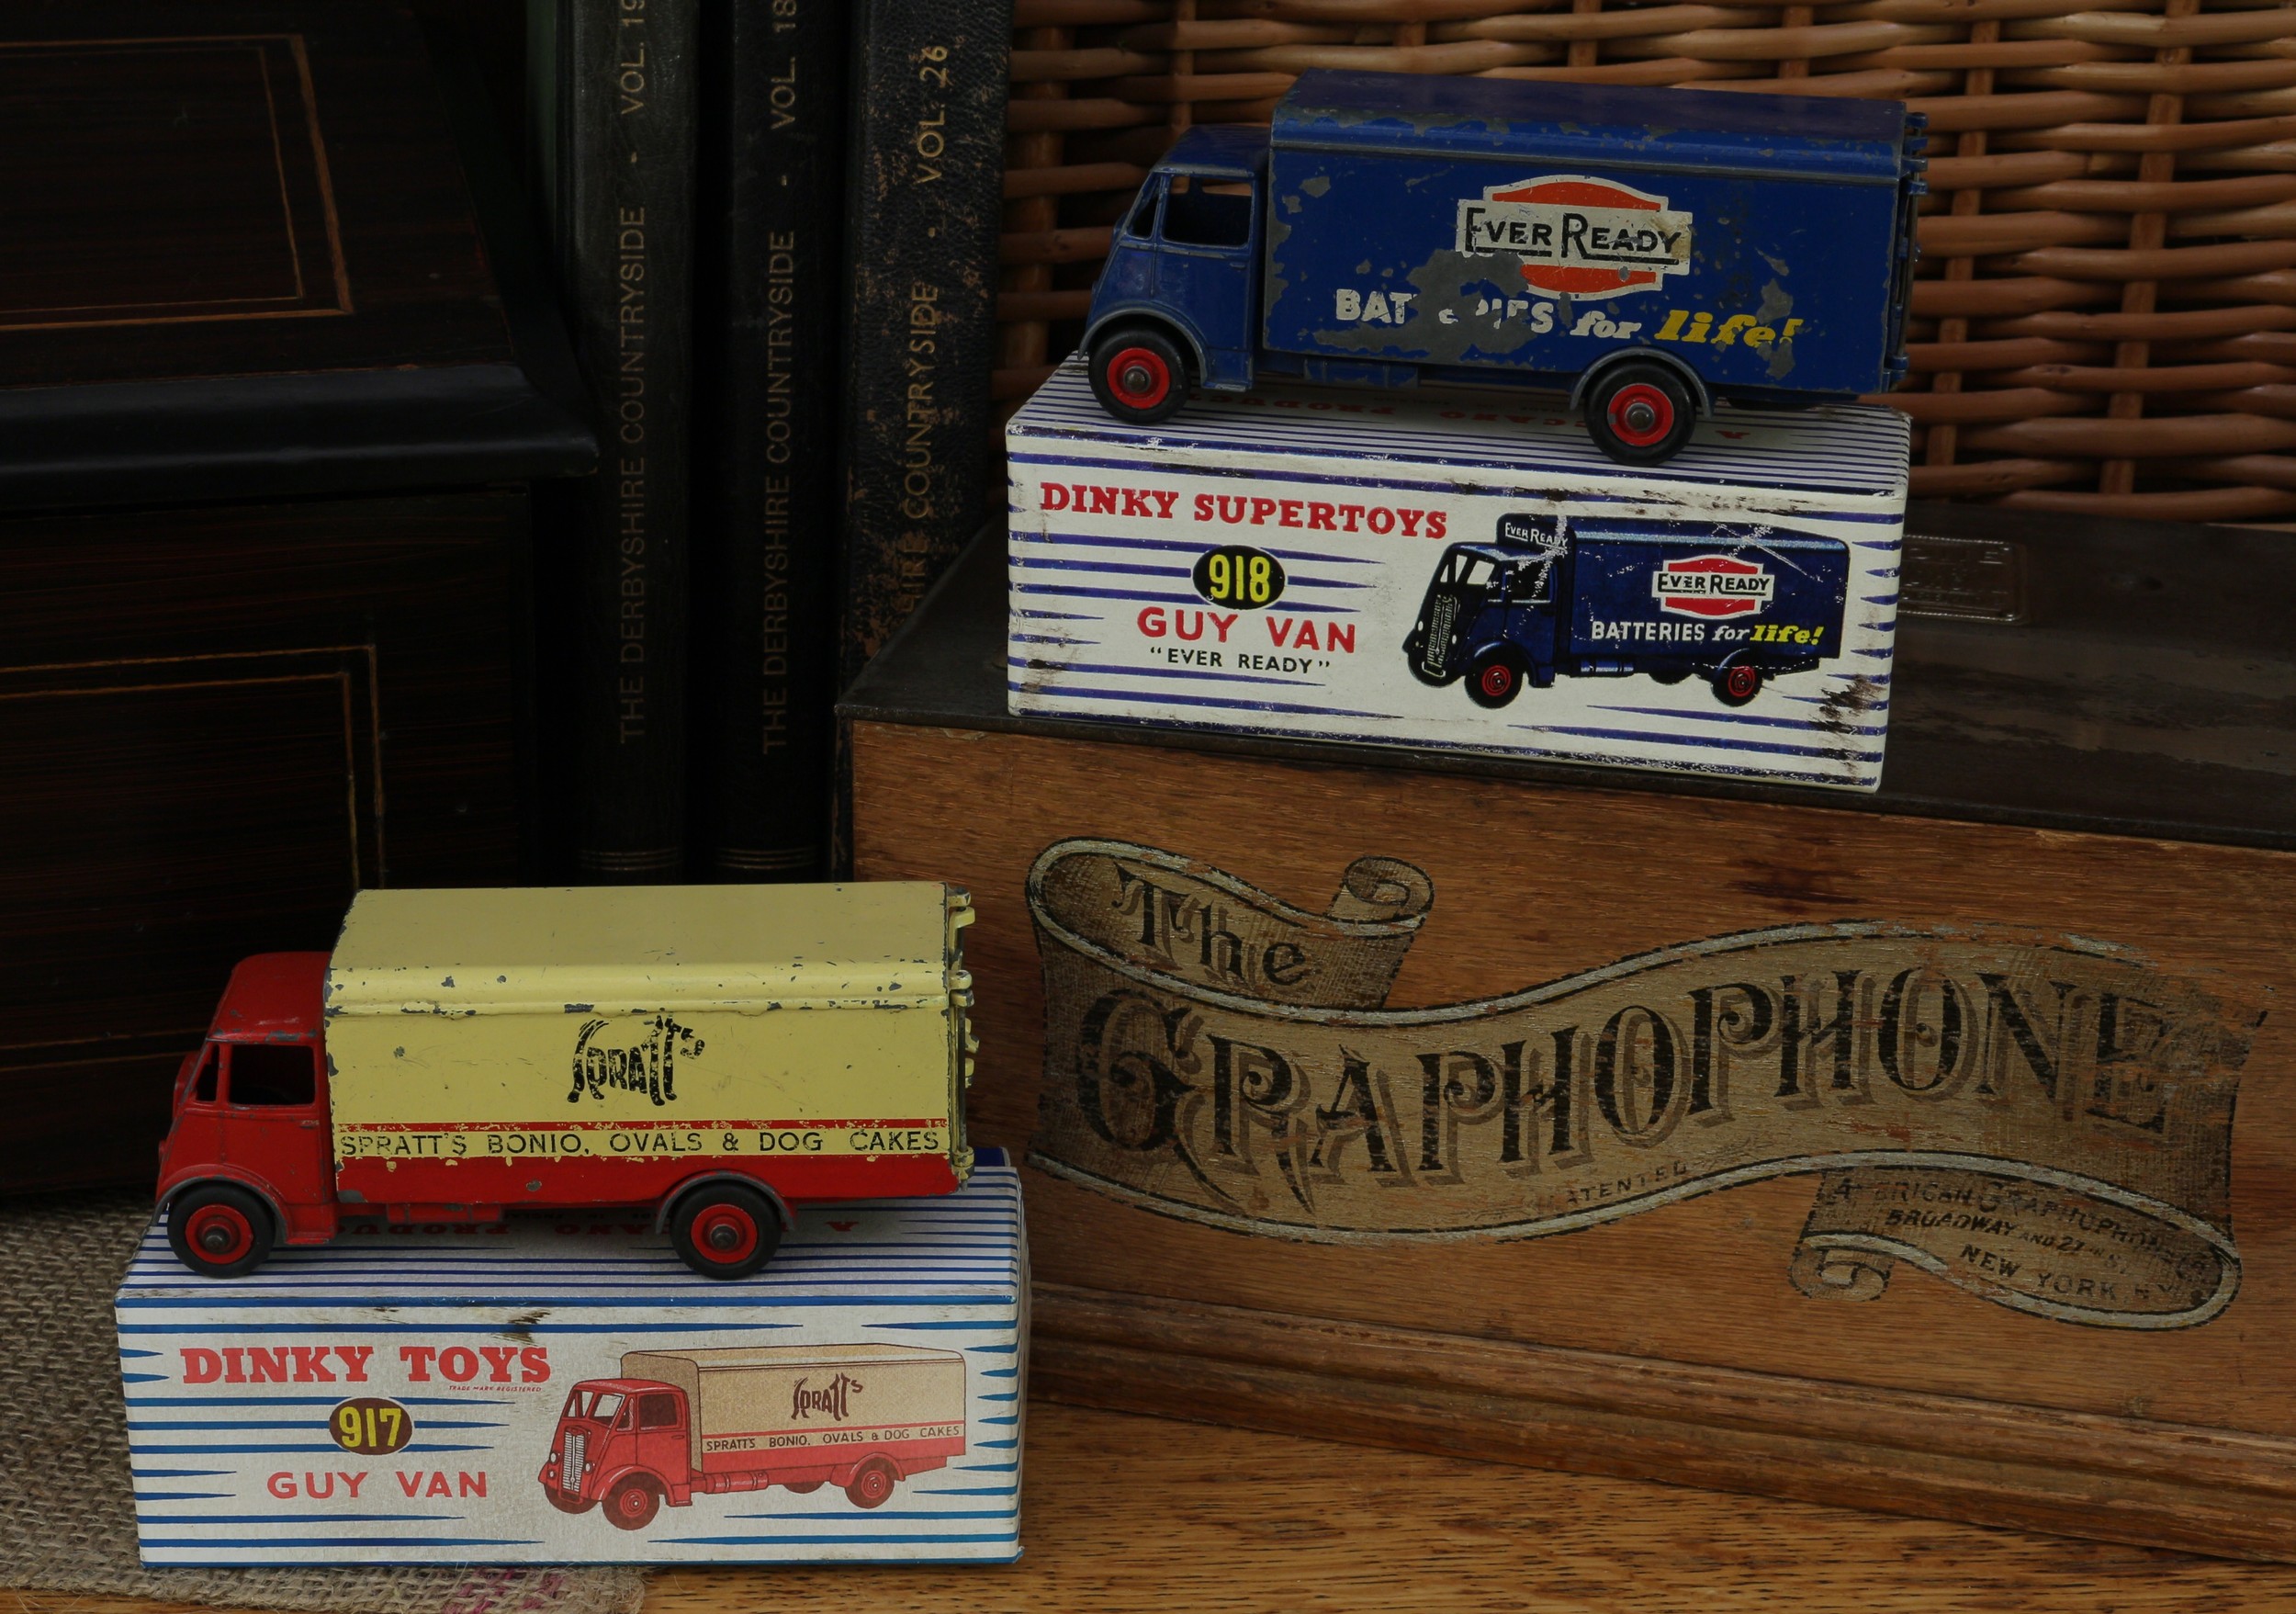 Dinky Toys 917 Guy van, red cab, chassis and wheel arches, cream and red van with 'SPRATTS, SPRATT's